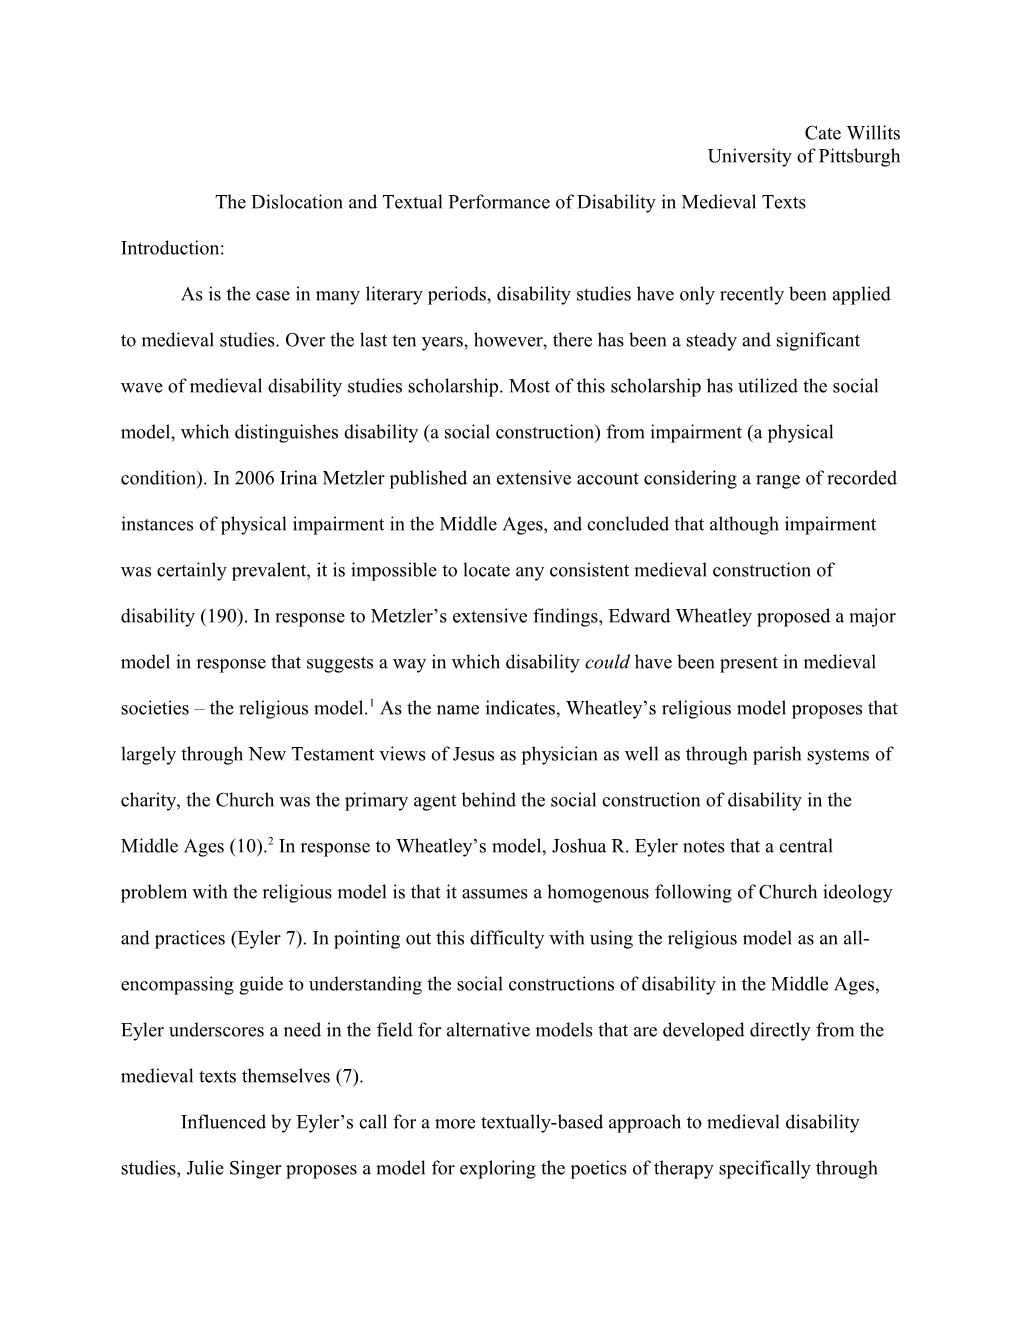 The Dislocation and Textual Performance of Disability in Medieval Texts